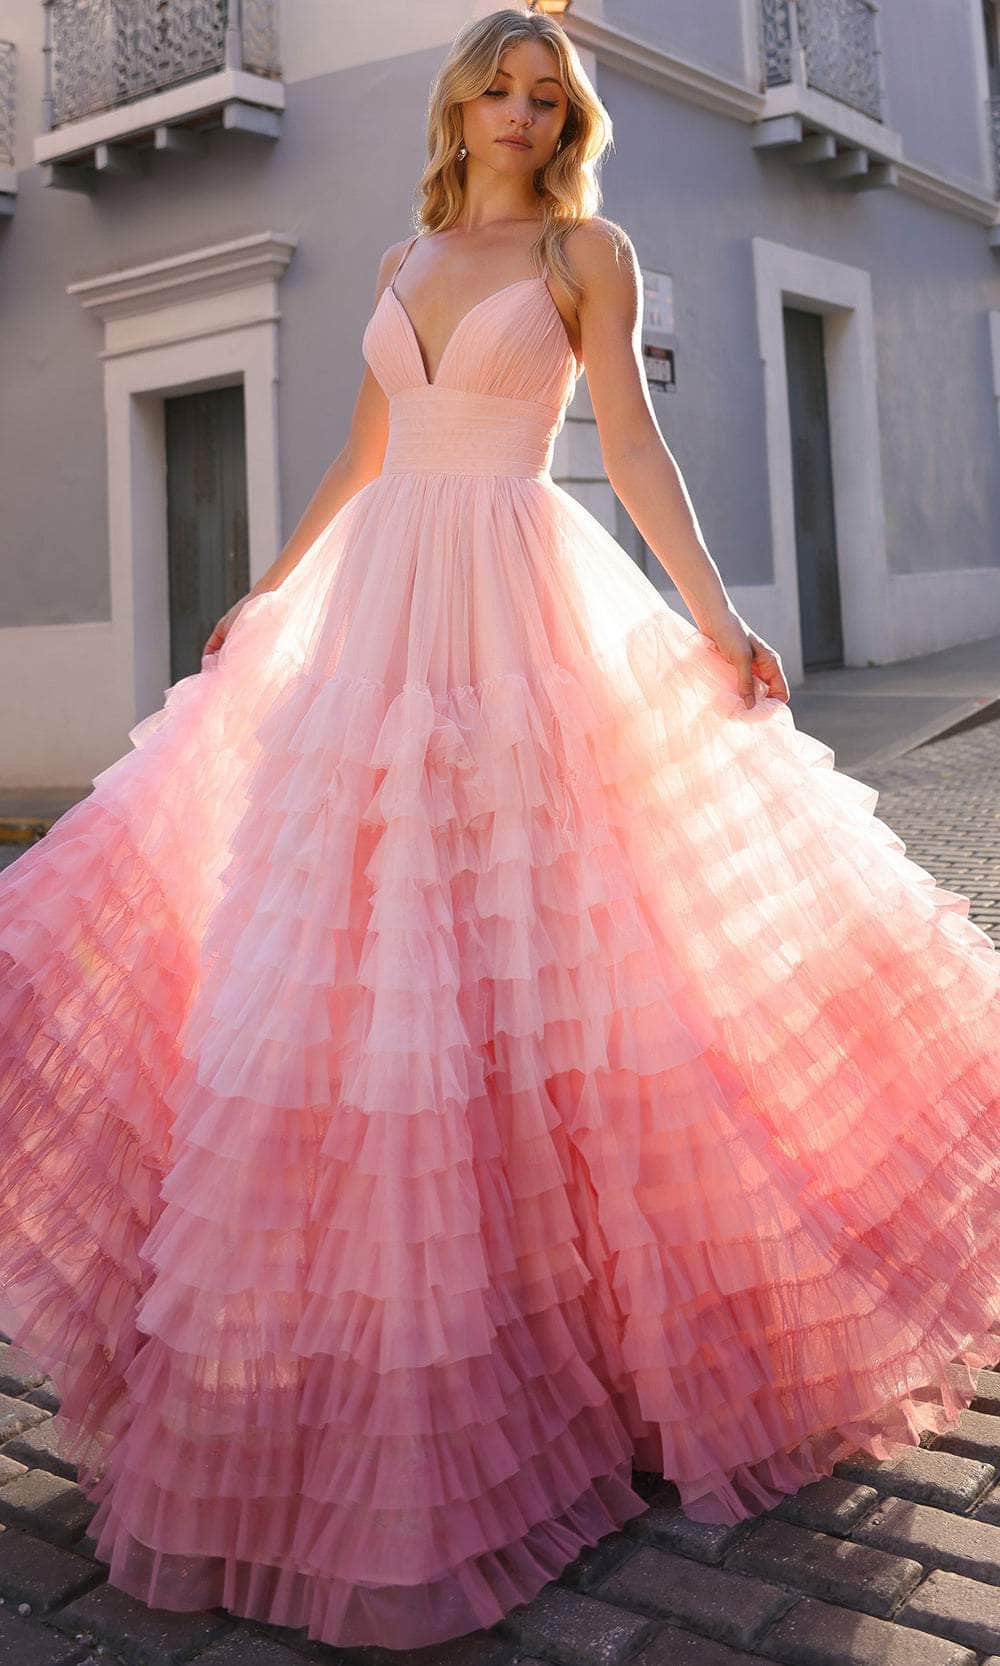 Image of Nox Anabel C1420 - Ruffled Ombre Prom Dress